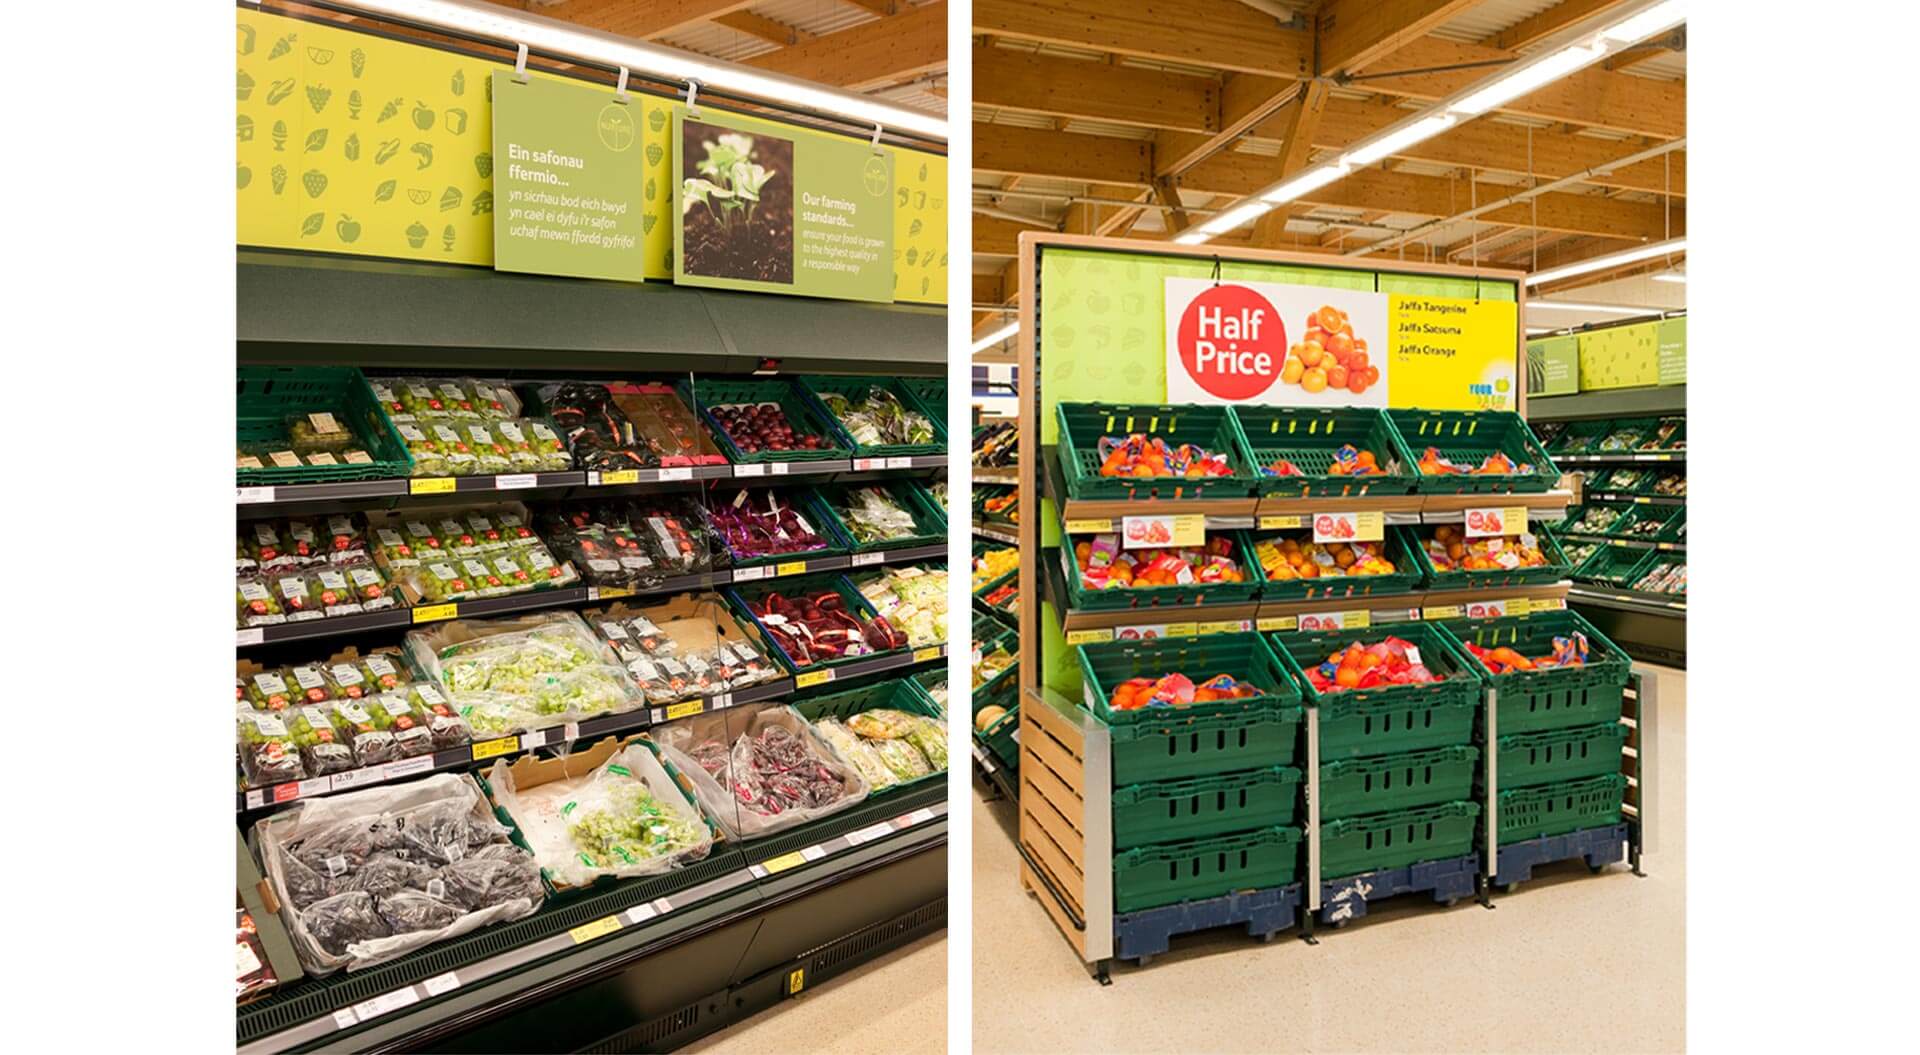 Tesco supermarket welshpool fresh produce merchandising systems and graphic communications